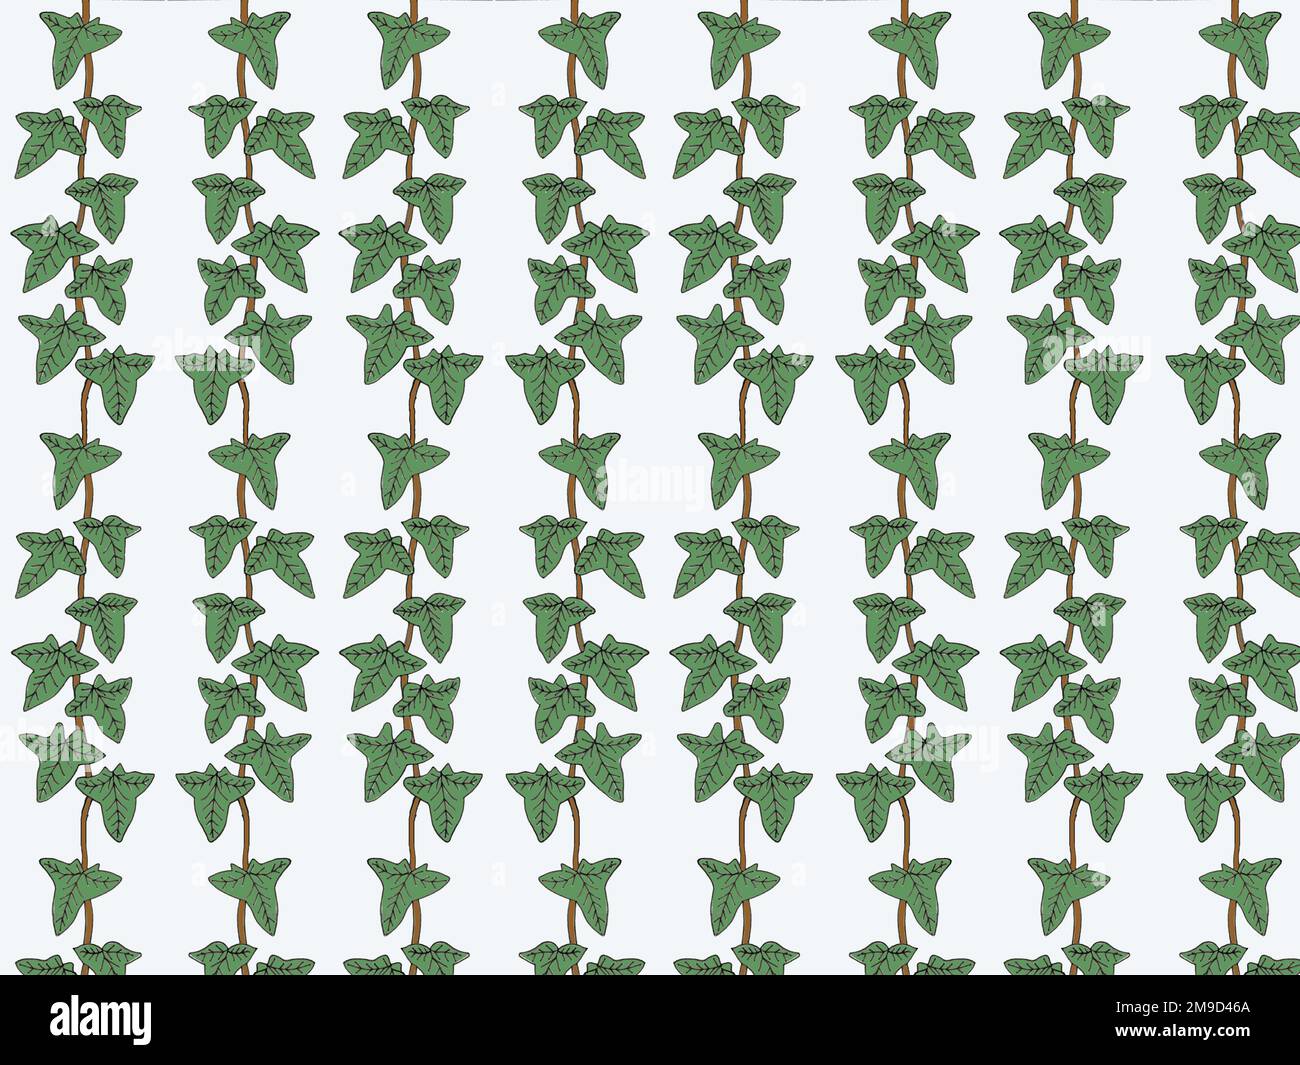 Trailing ivy repeating pattern Stock Photo